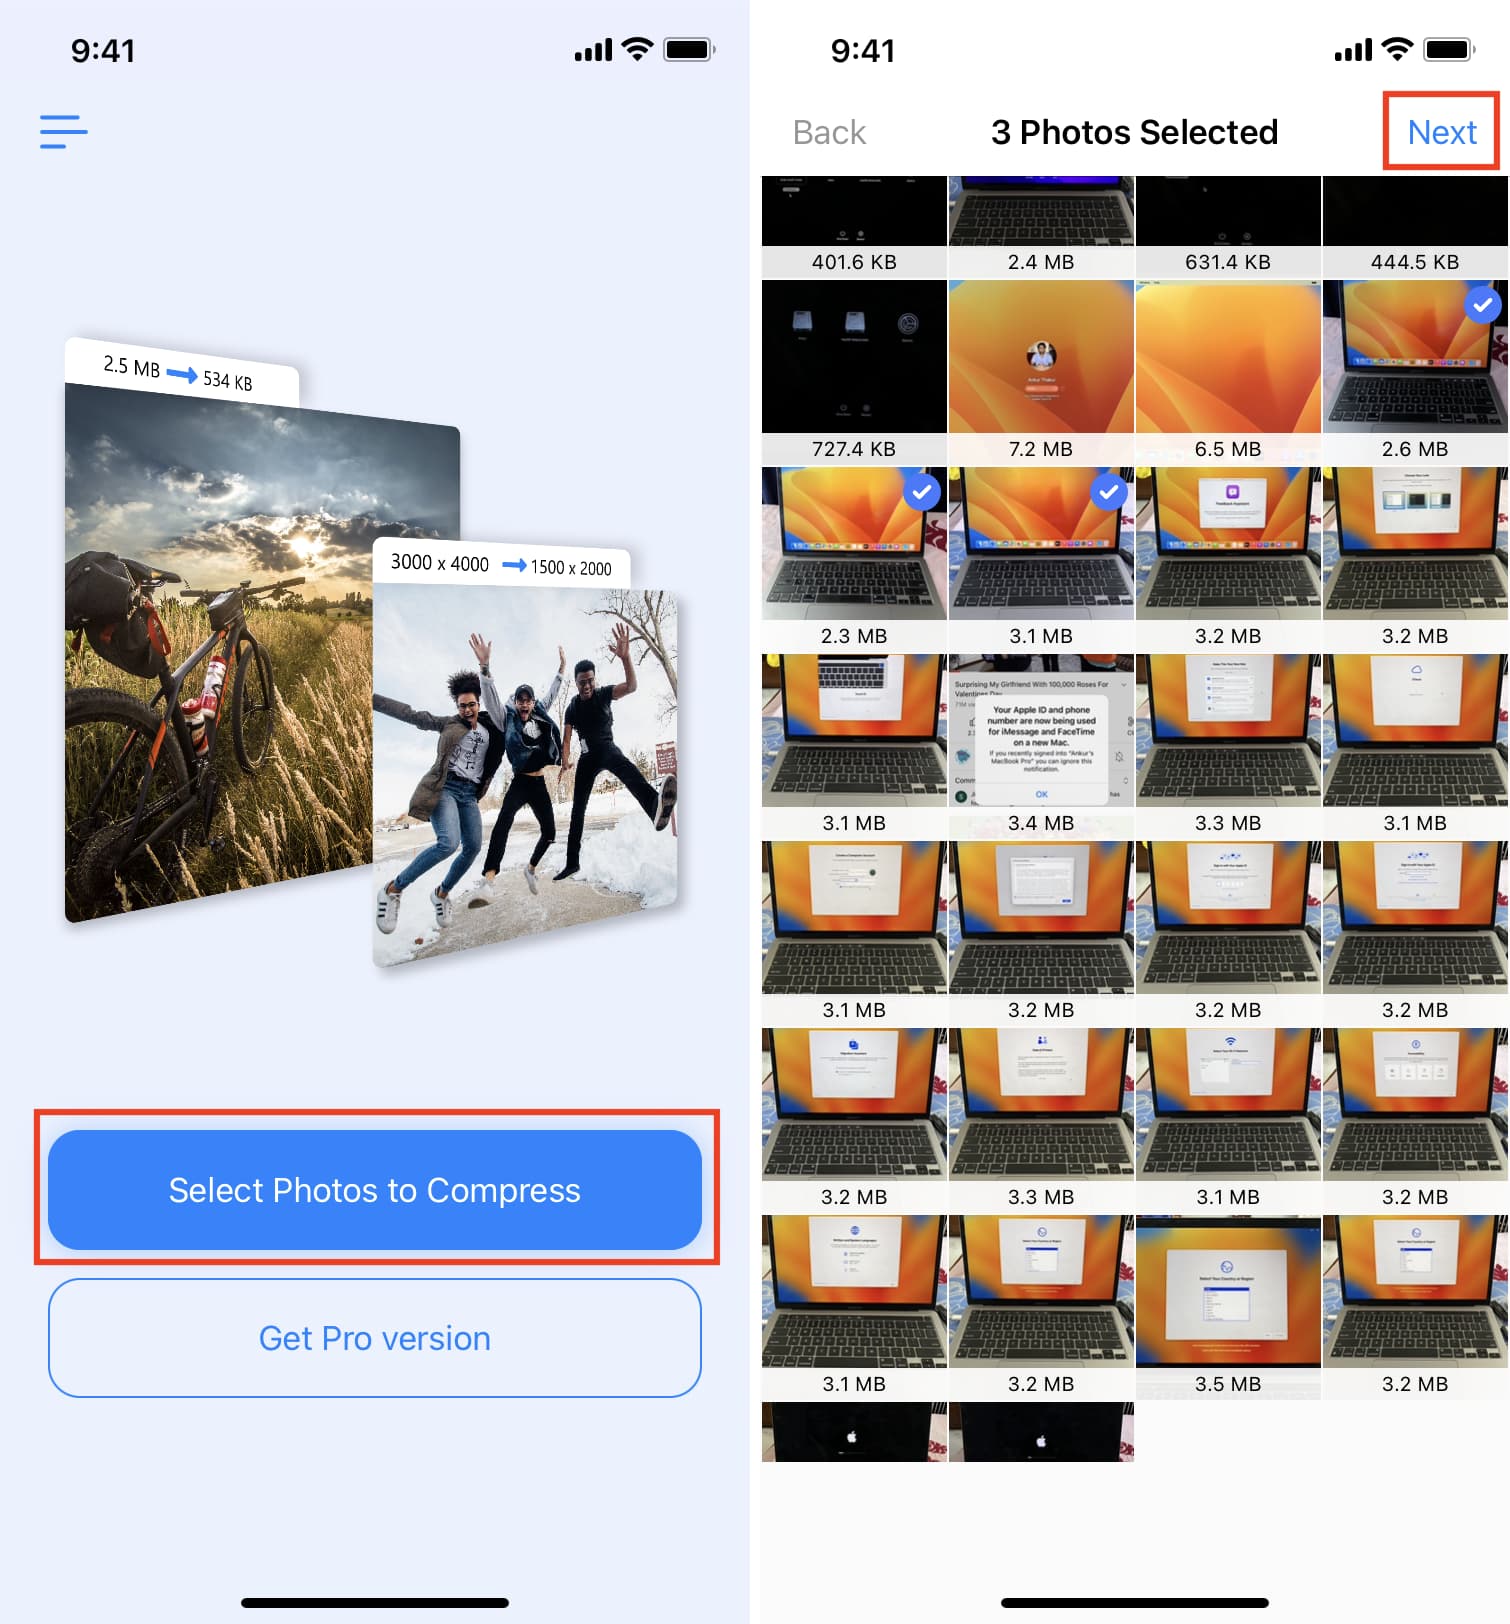 Select photos to reduce file size